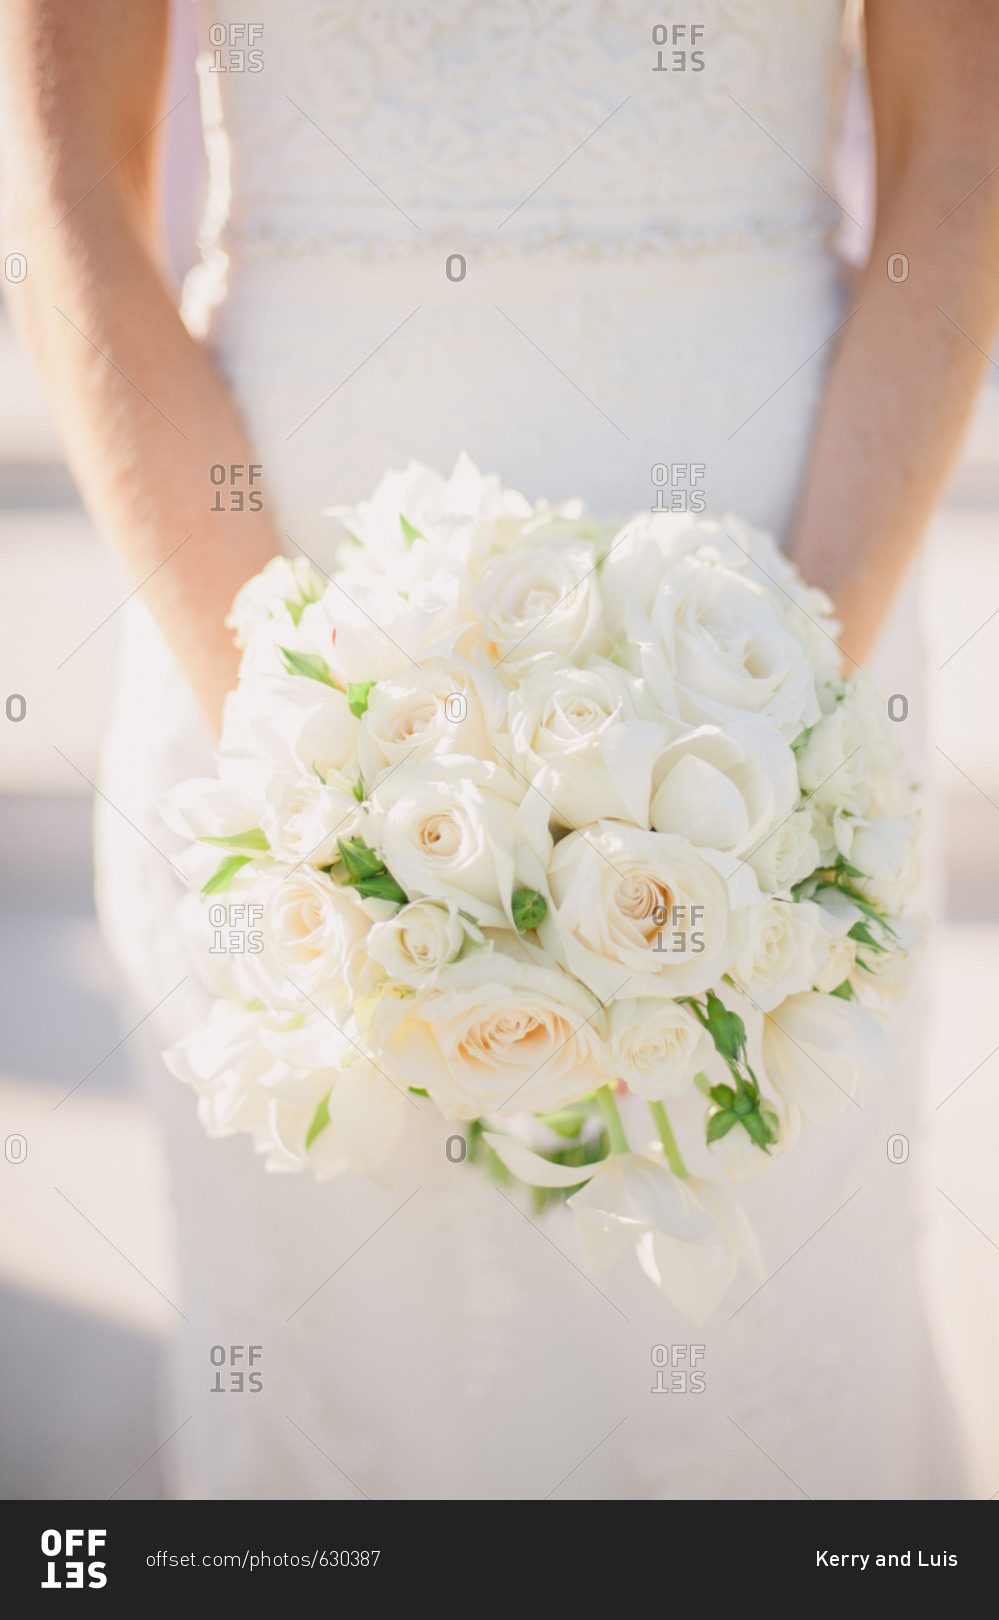 Bride holding wedding bouquet of white roses